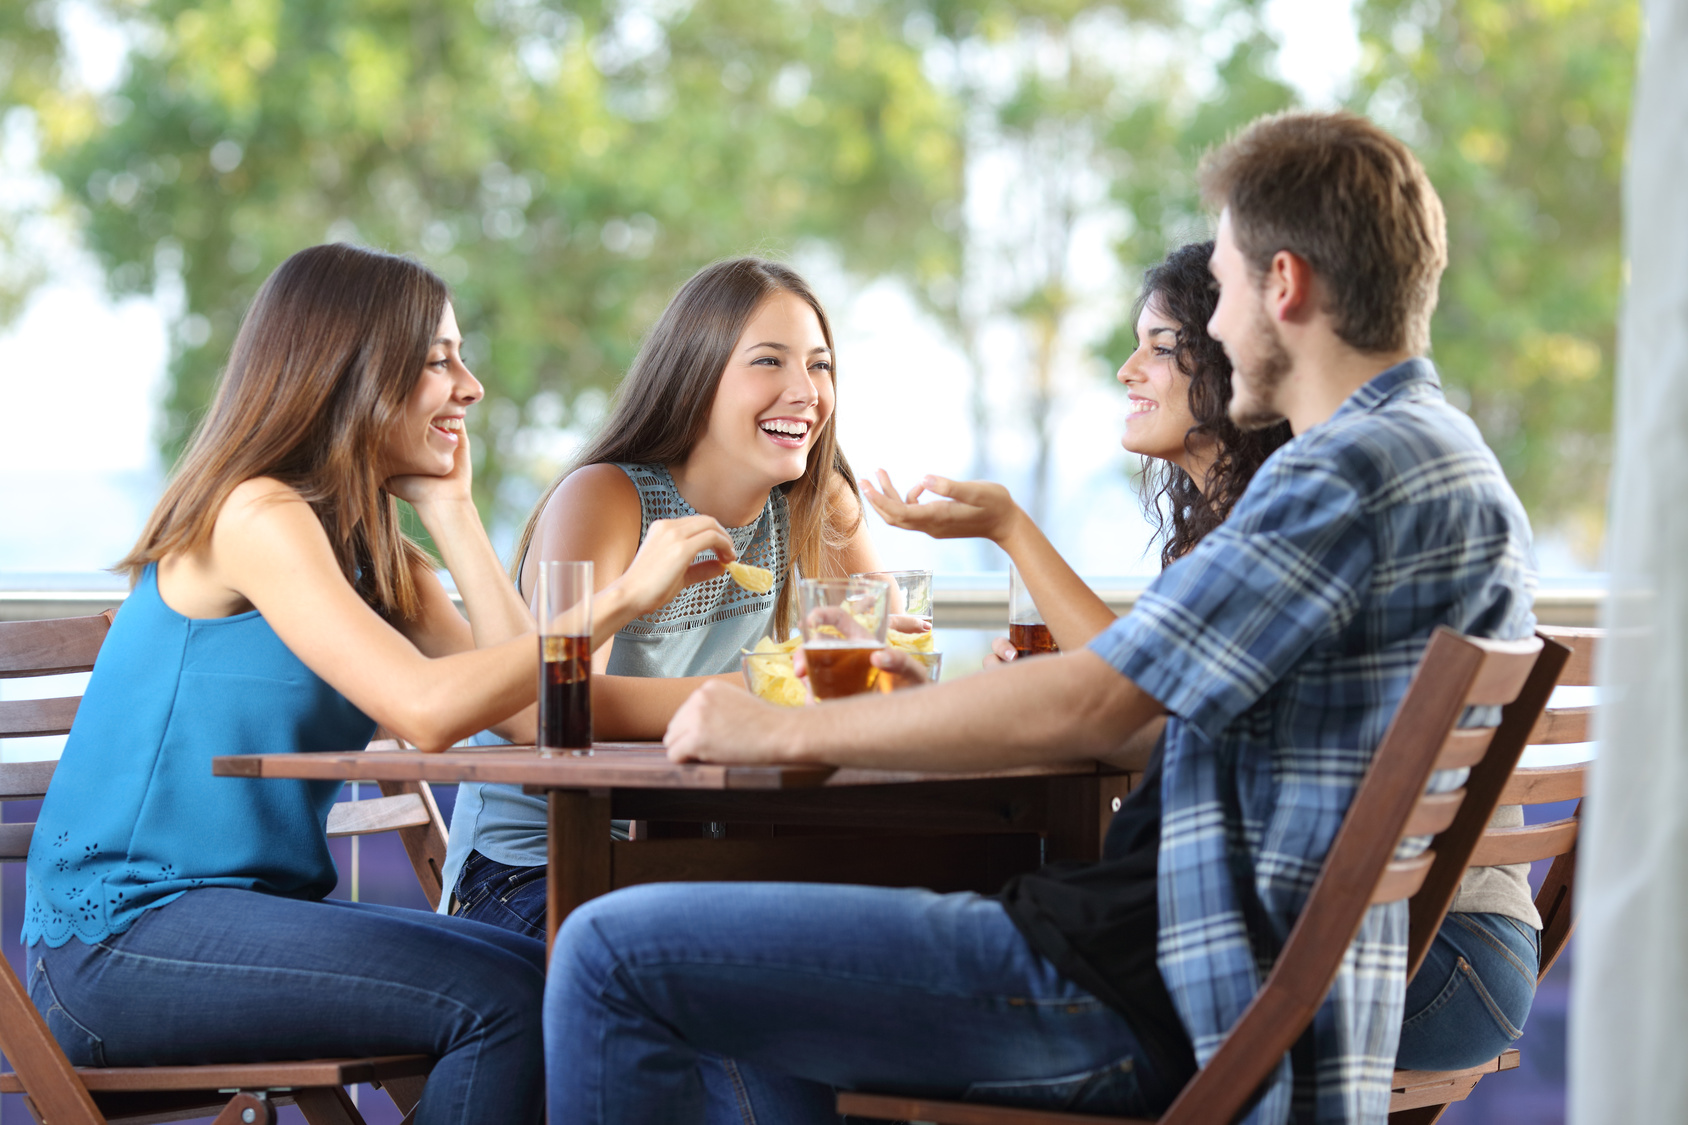 Group of young men and women talking outdoors at a table with drinks